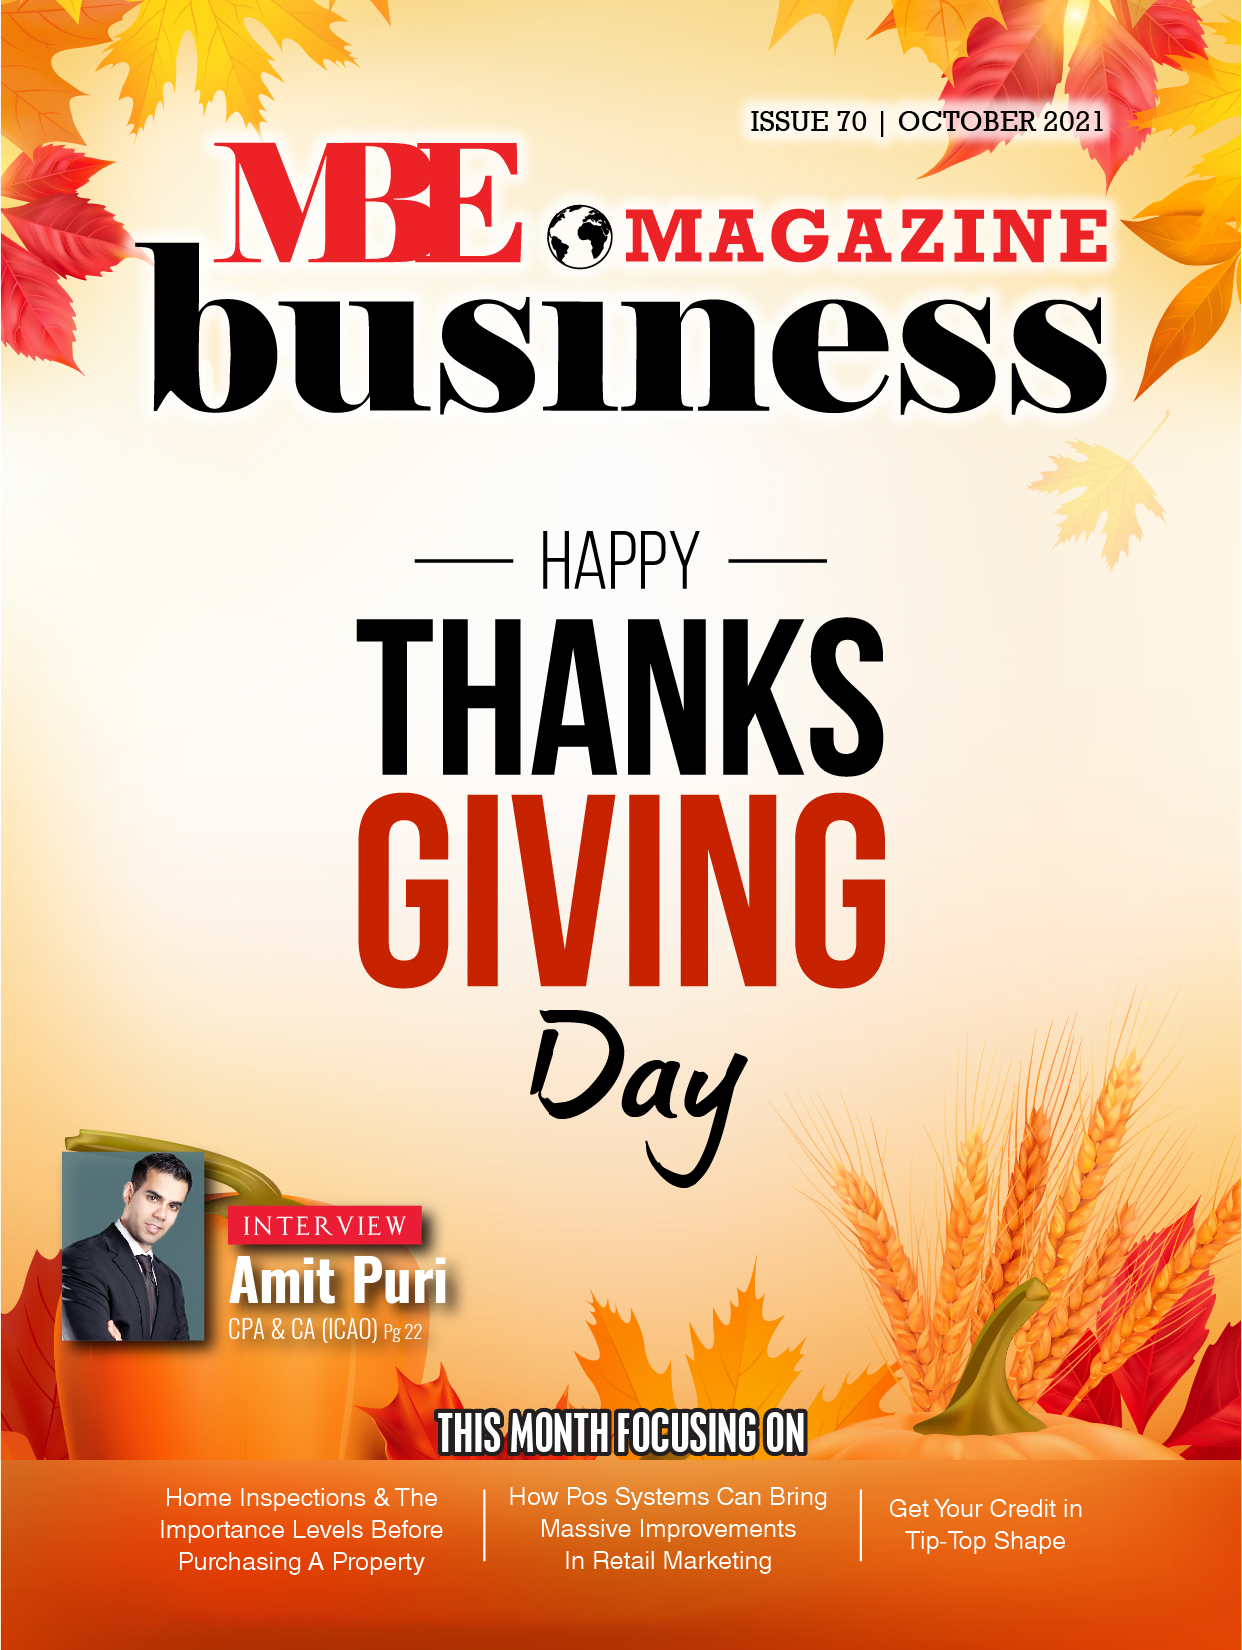 happy thanksgiving day 2021 - mbe business magazine_Page_01